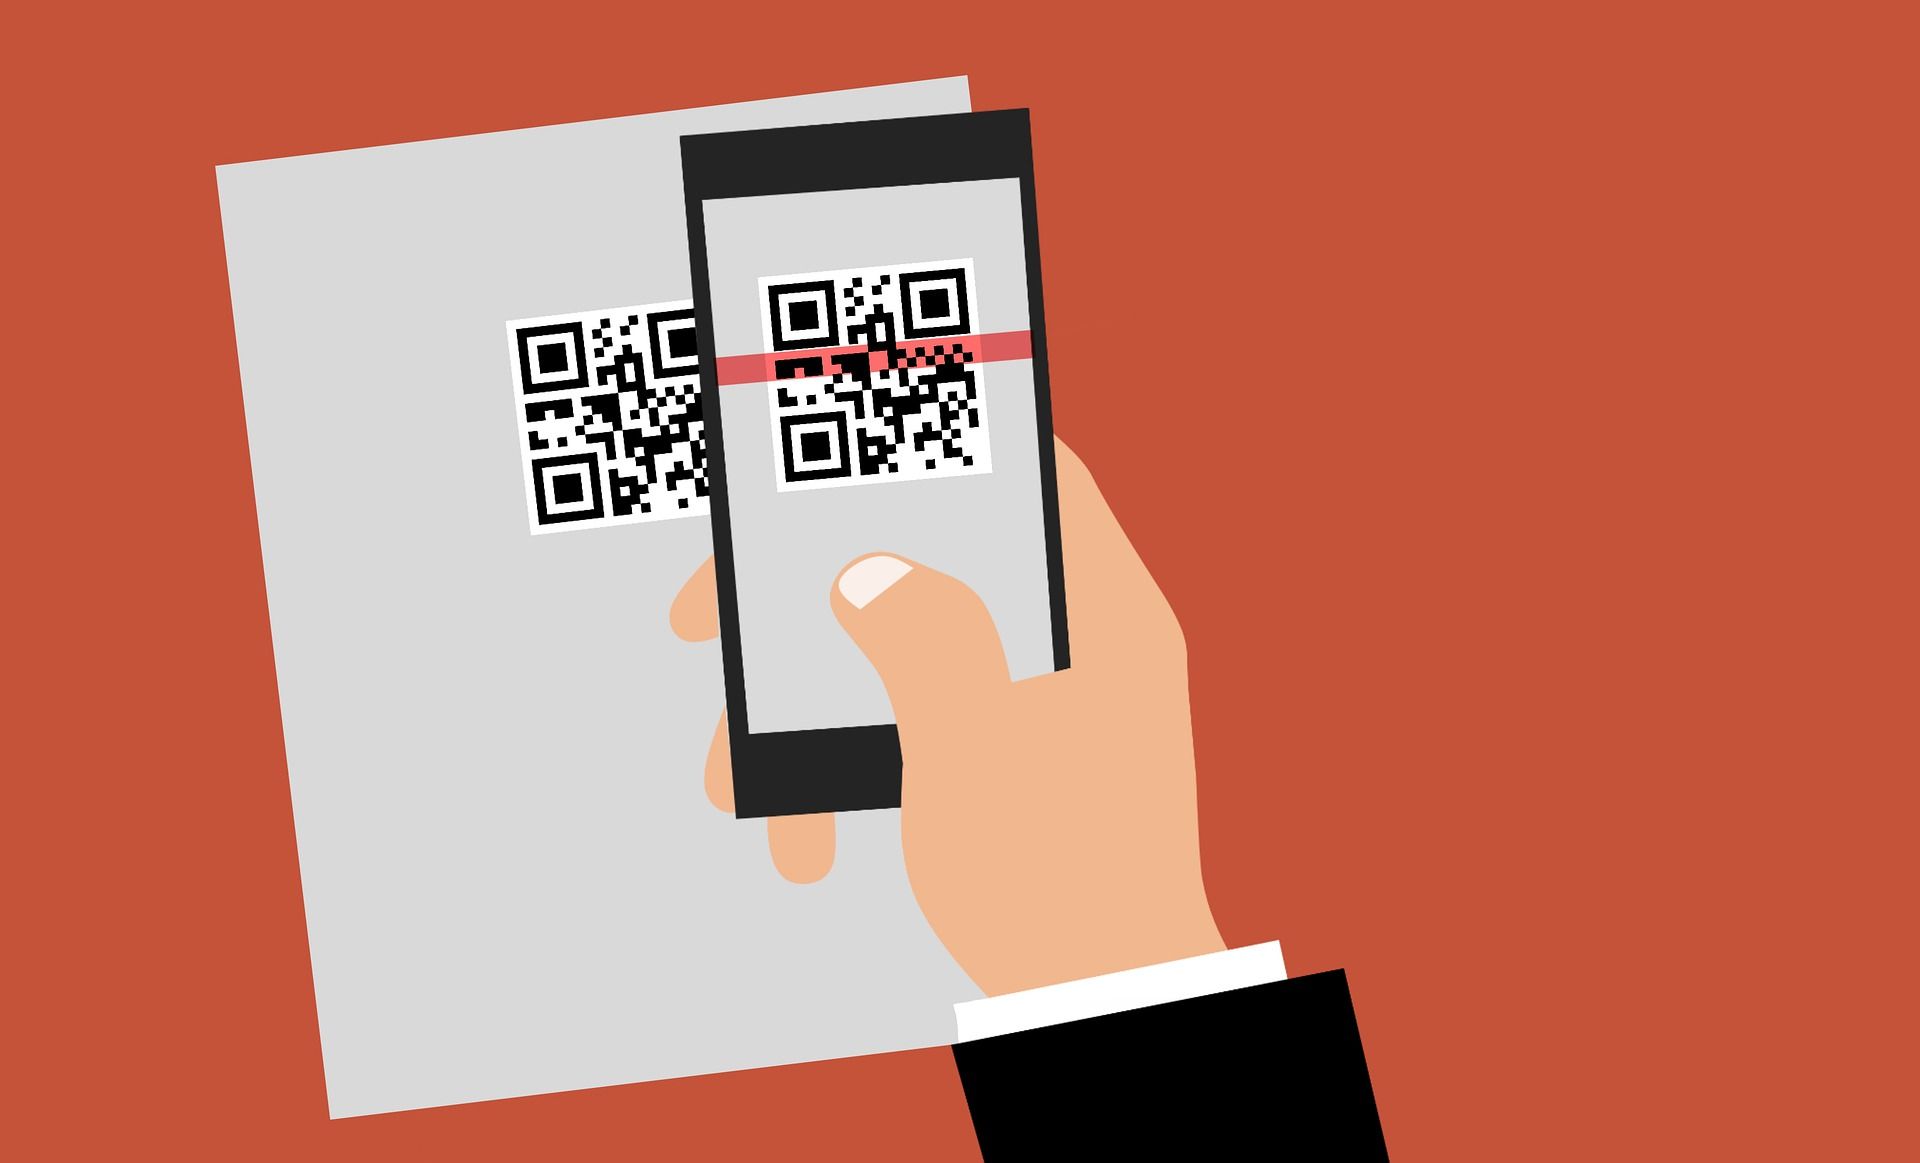 cartoon figure scanning QR code on a page using phone